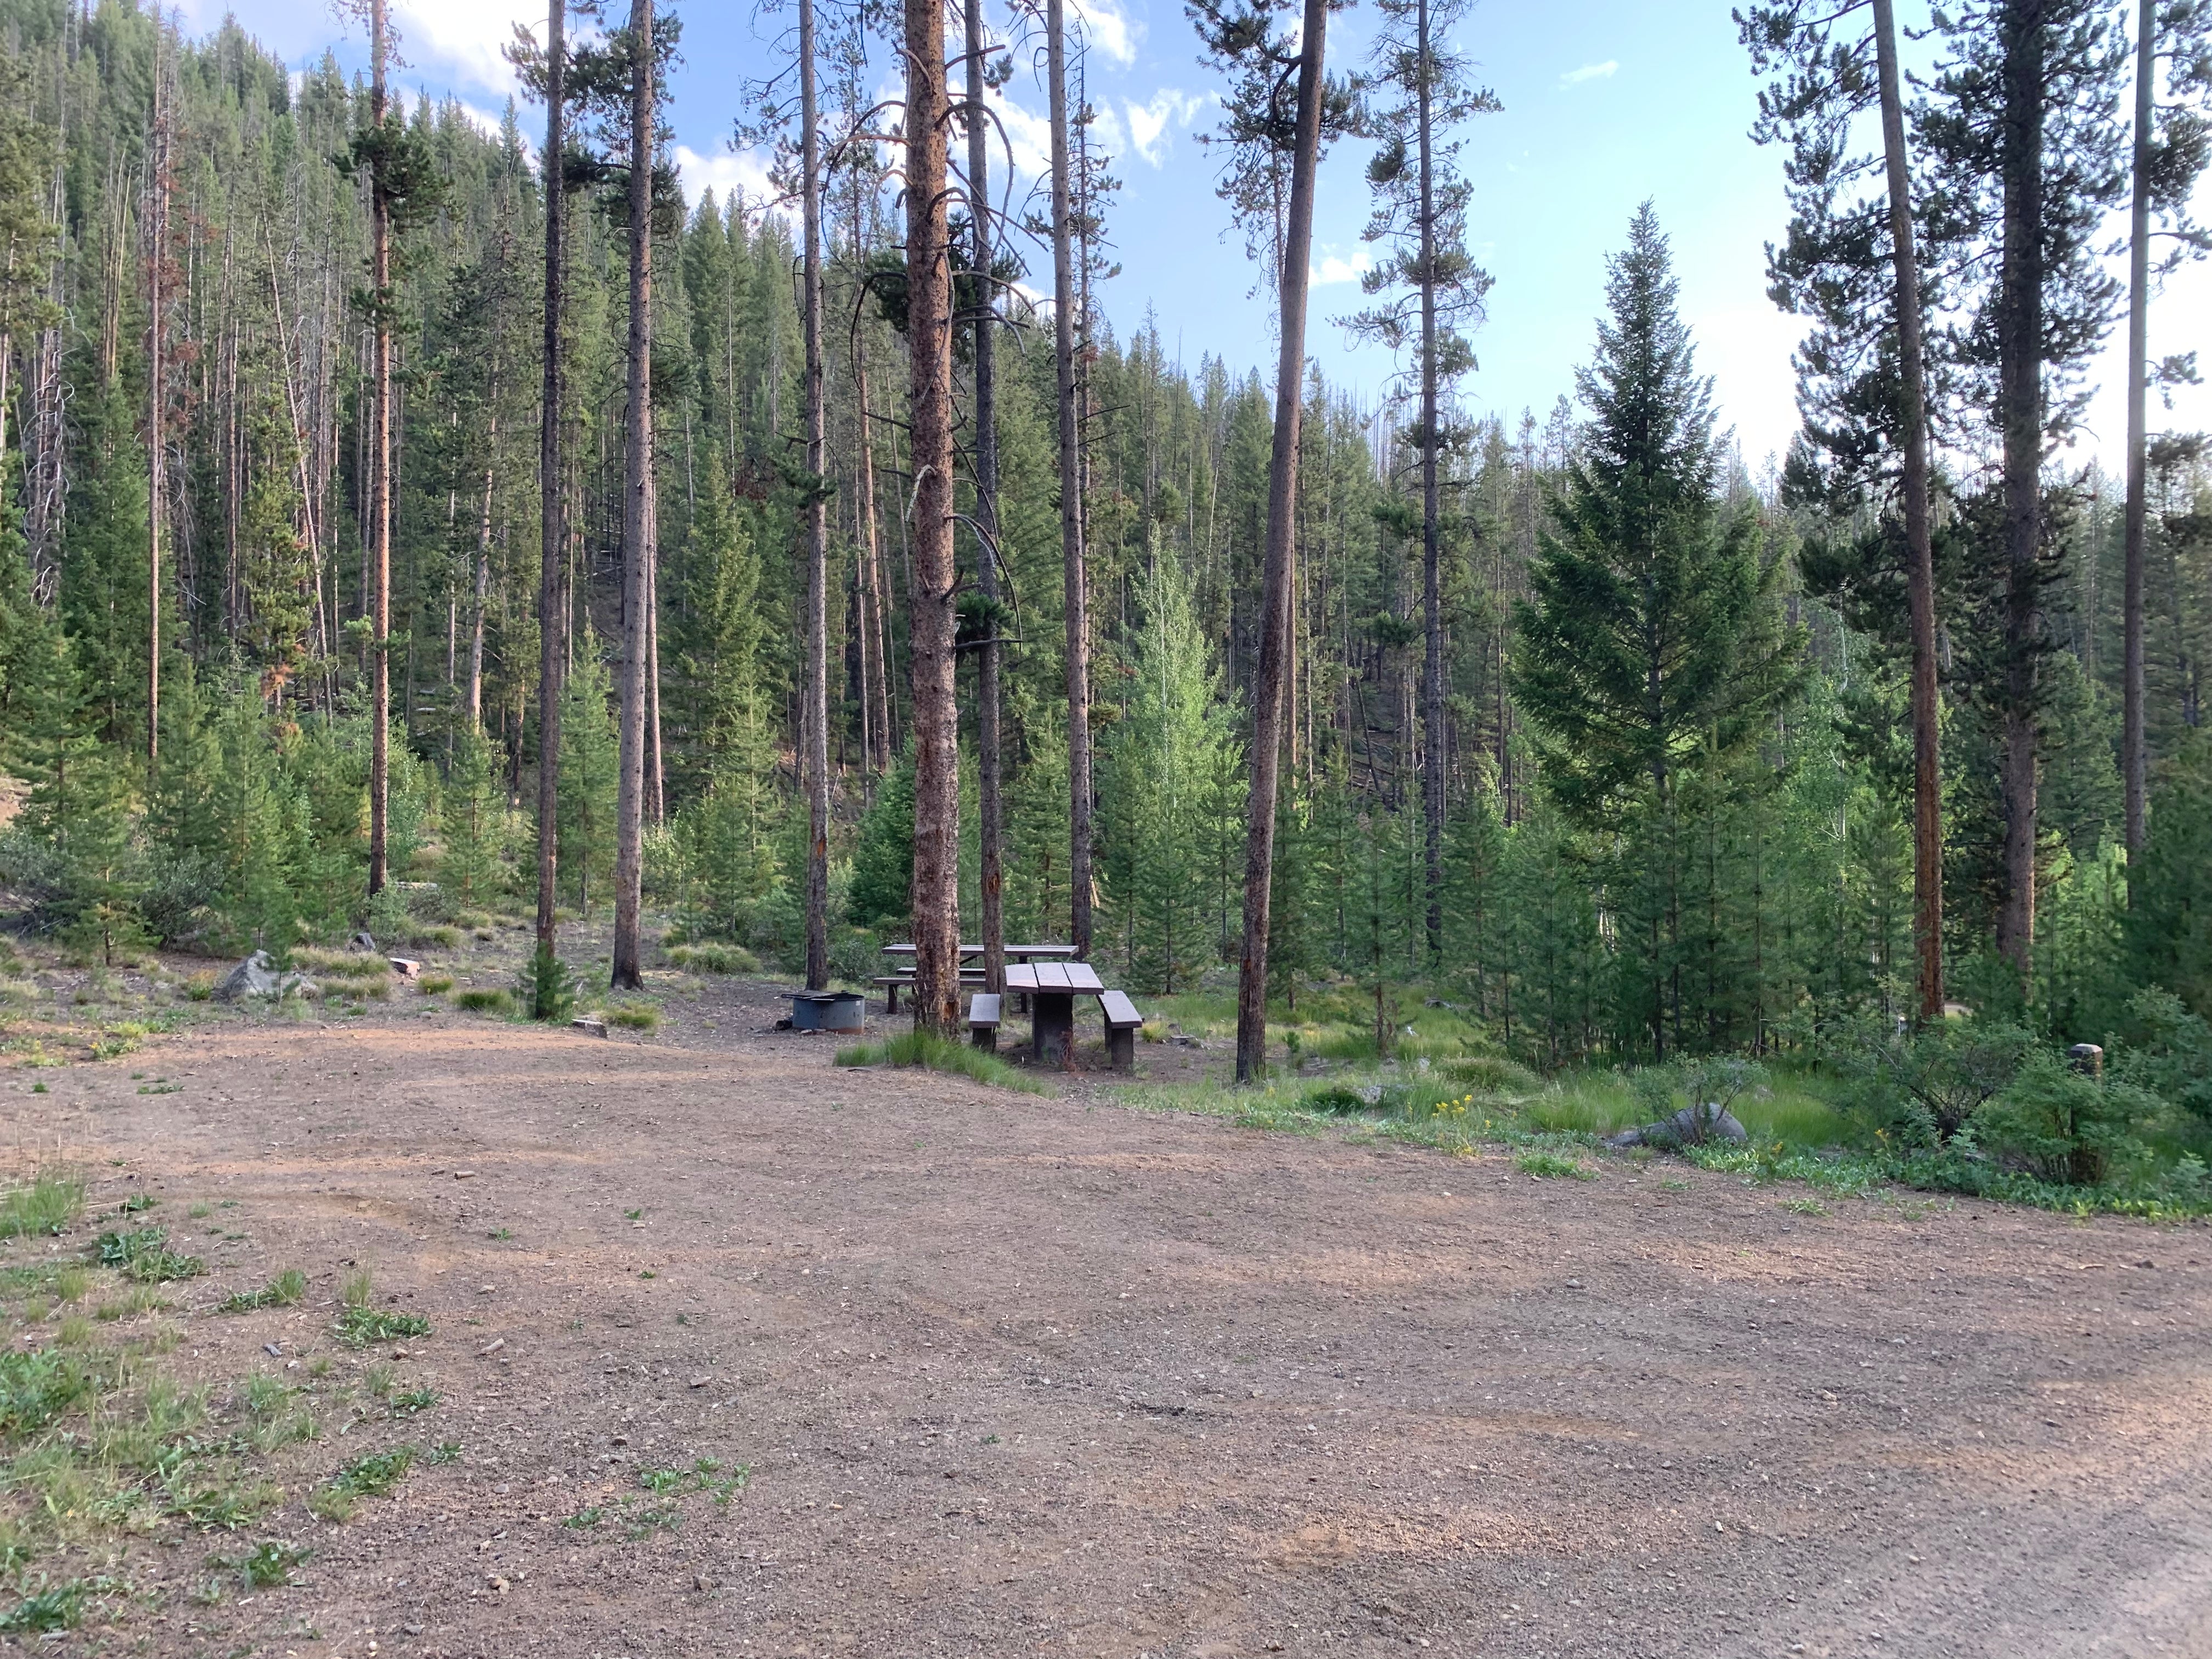 Camper submitted image from Custer #1 Campground - 3